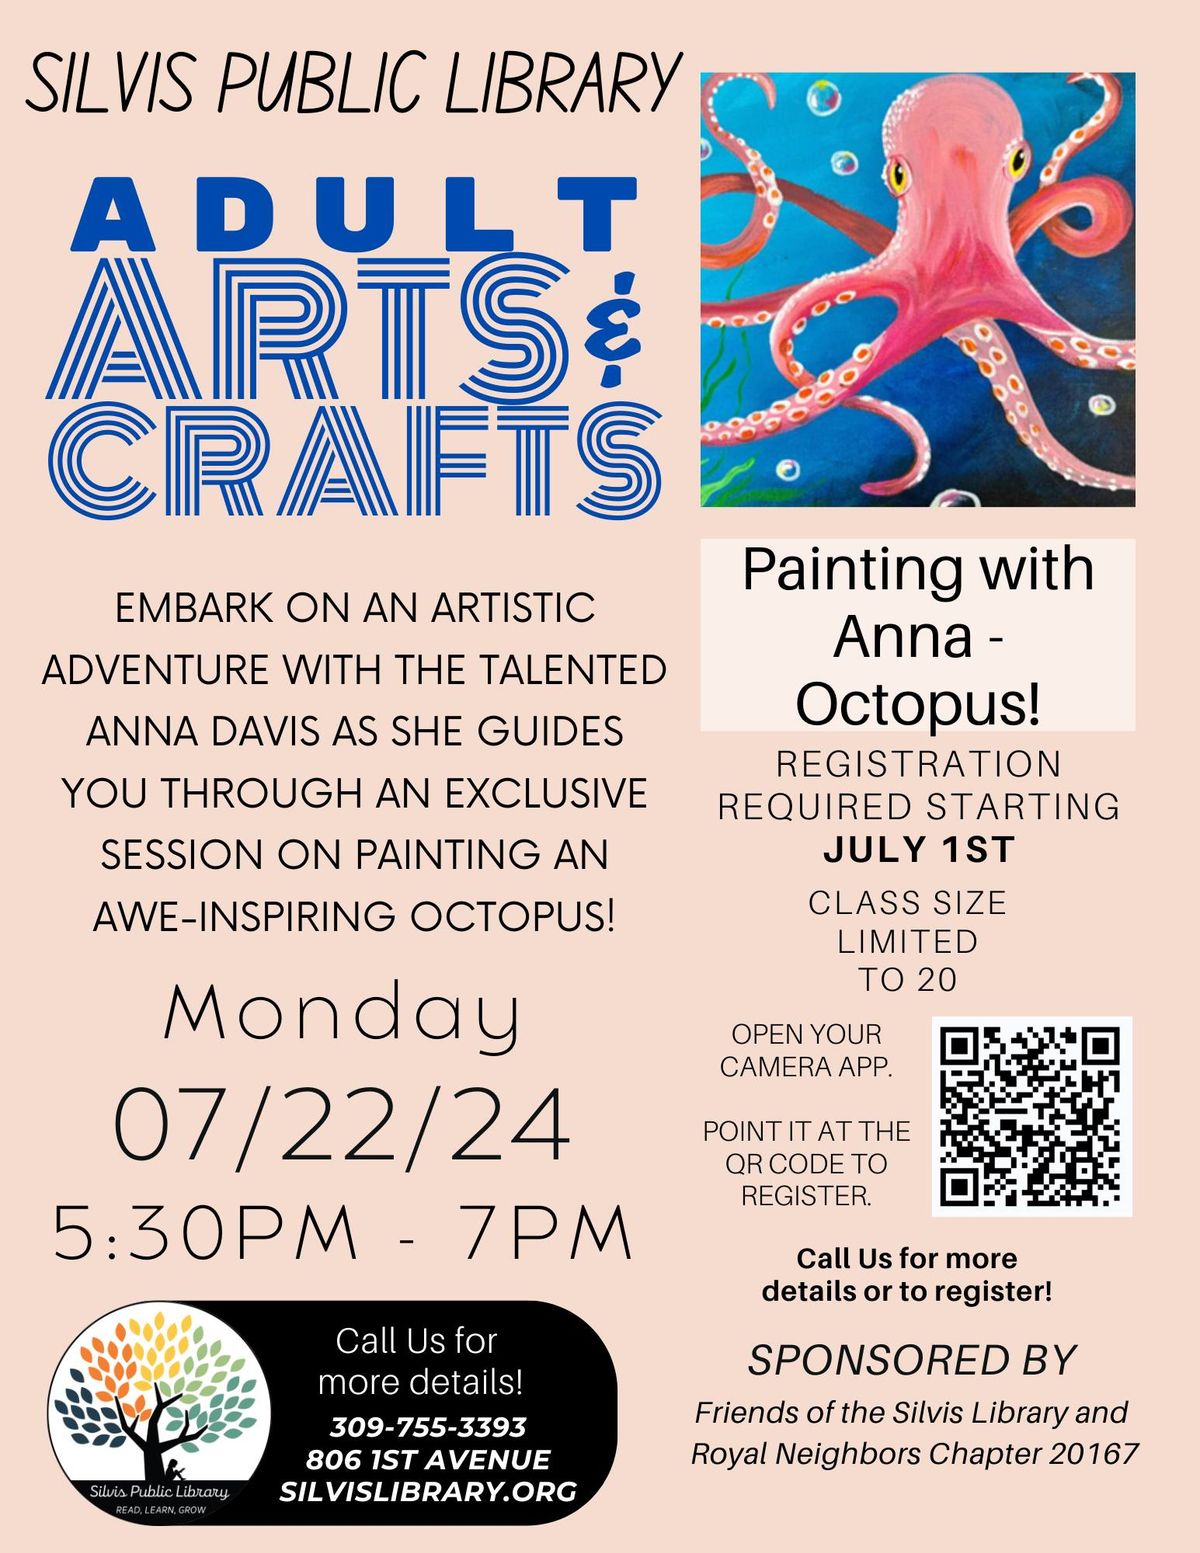 Adult Arts & Crafts: Painting with Anna - Octopus!